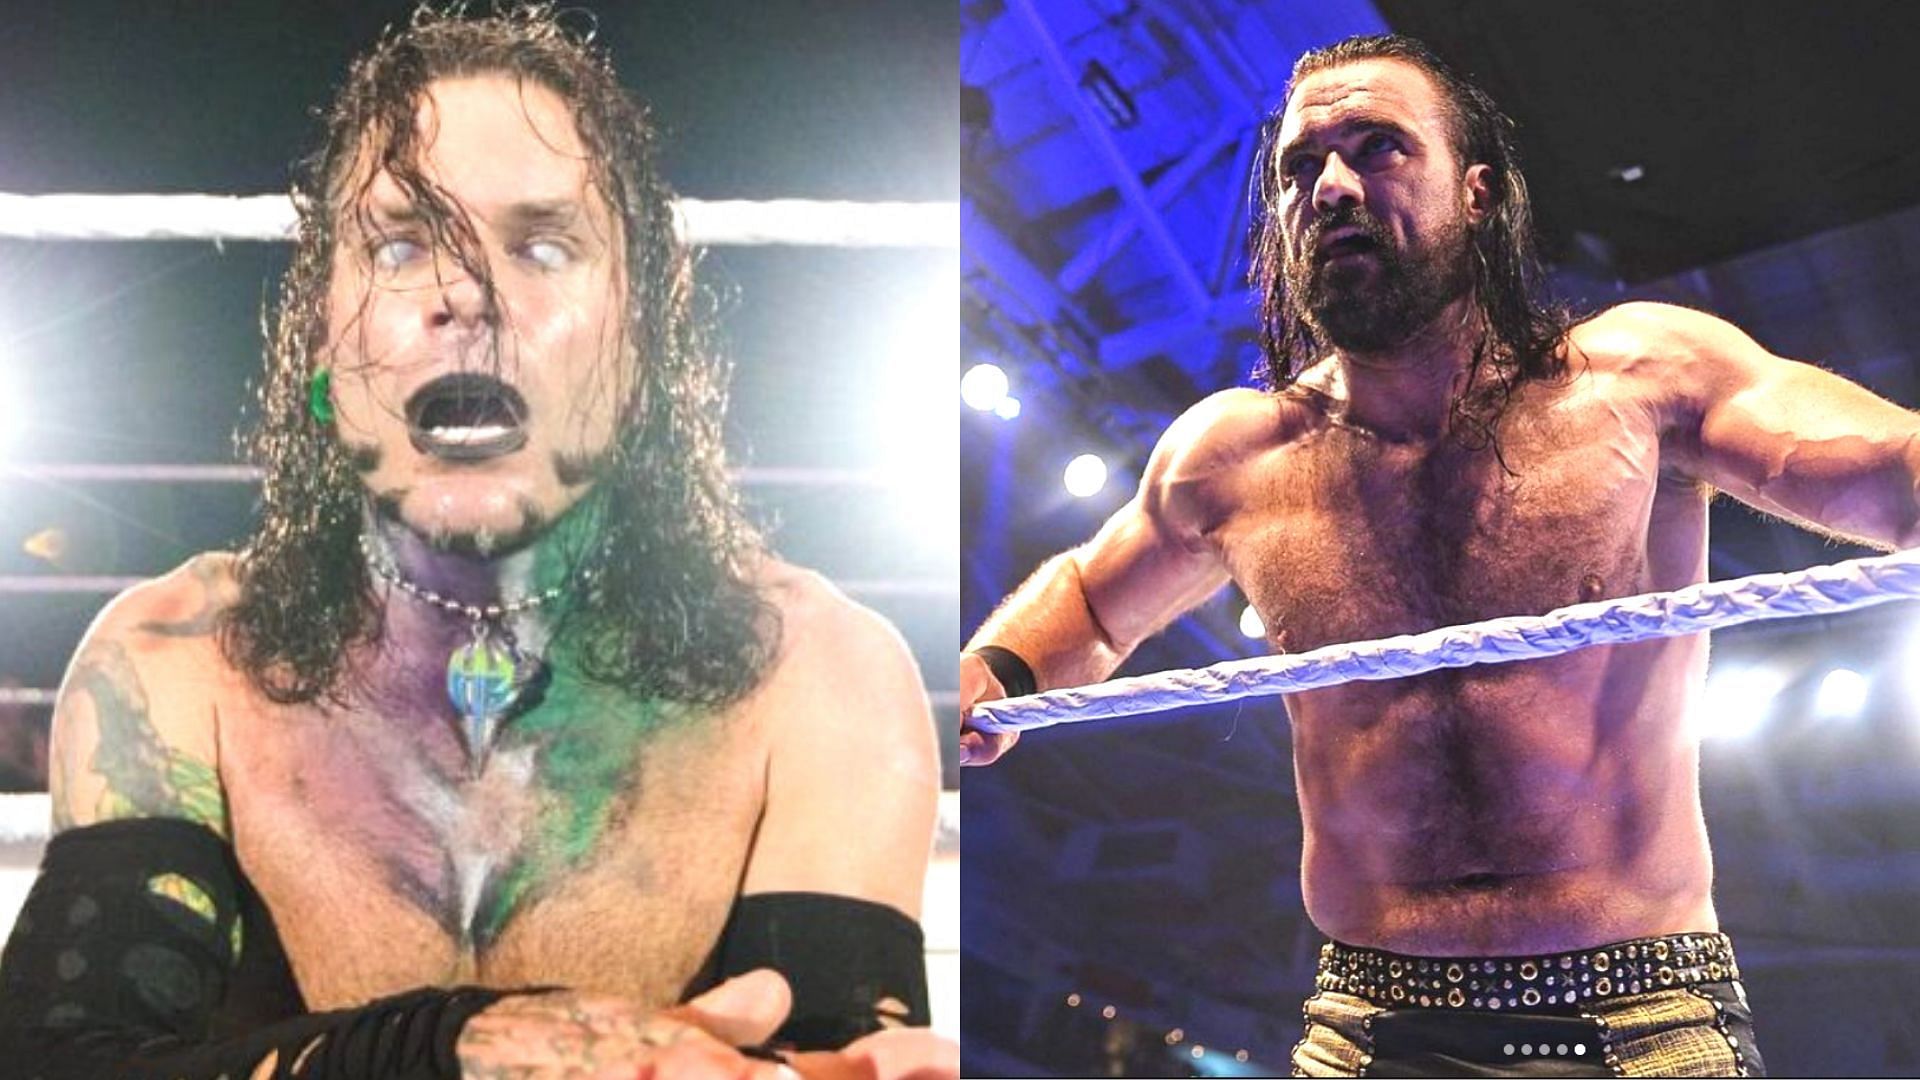 Jeff Hardy and Drew McIntyre teamed up in the main event of the WWE Live Event.